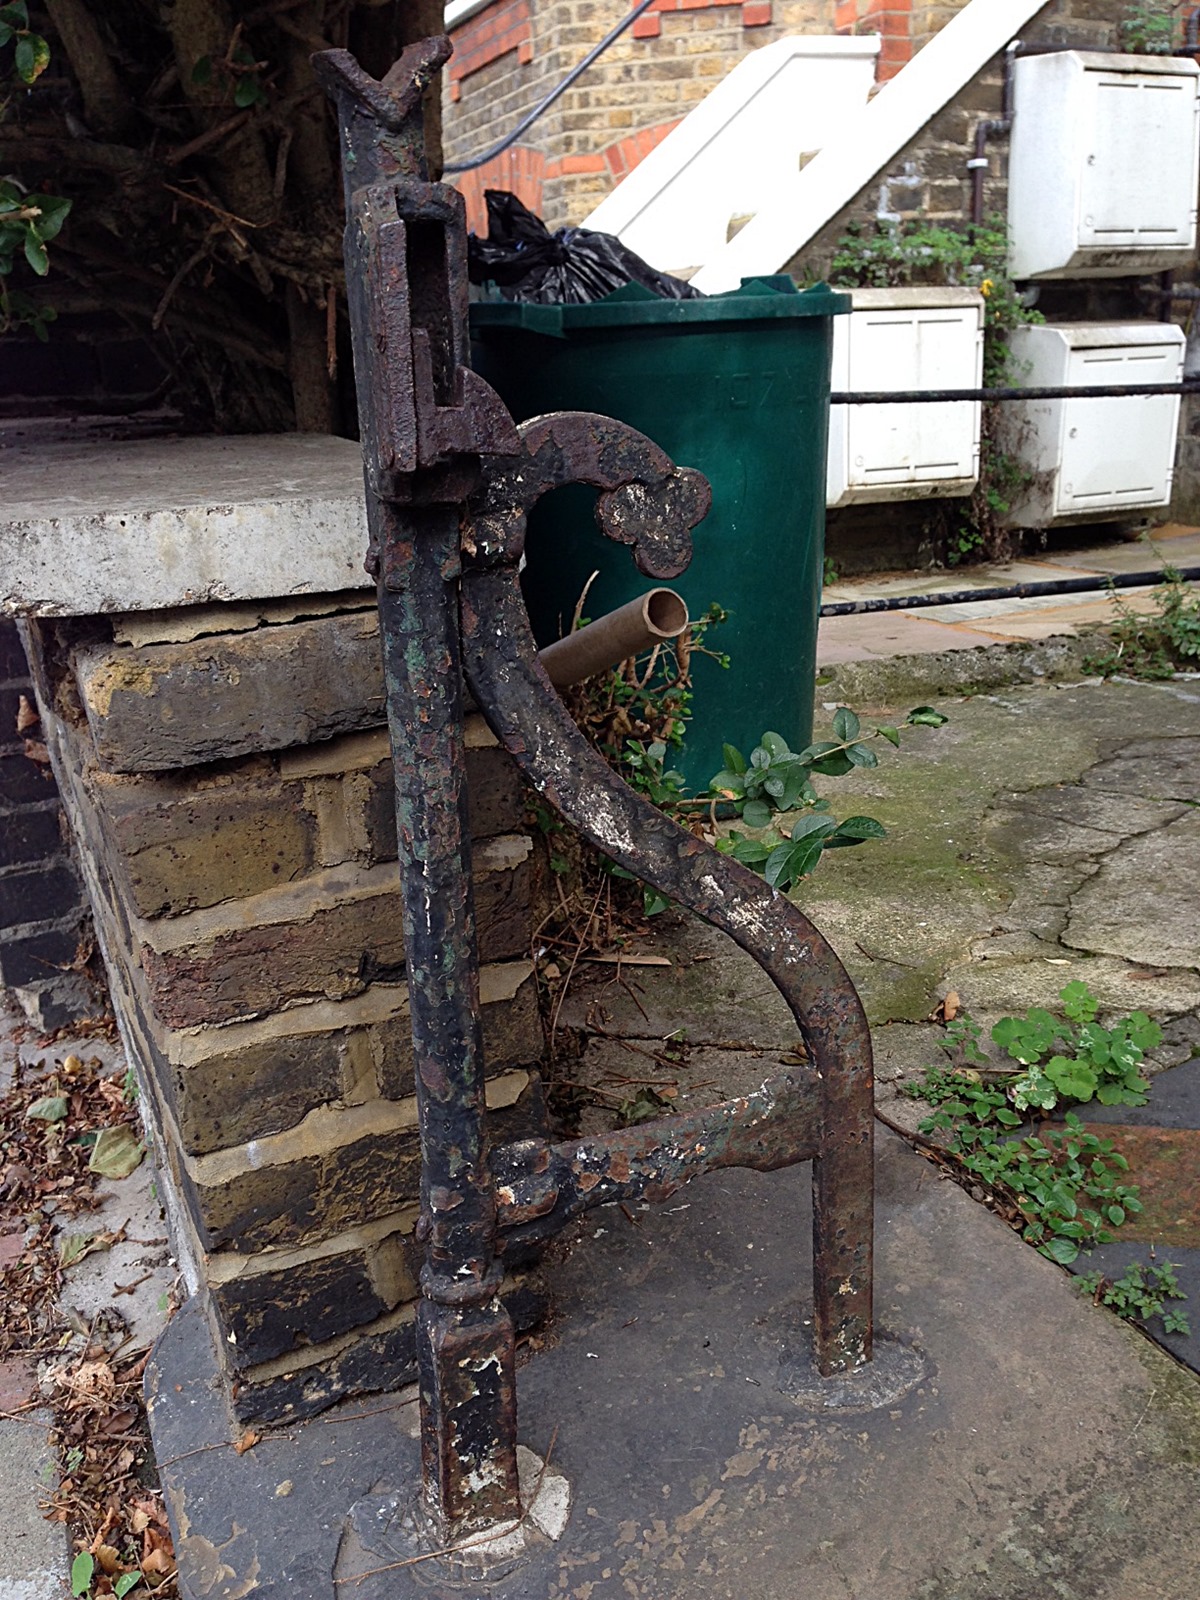 victorian original wrought iron roll back gate with old York stone quarry tile path and original London Stock brick wall Putney West Hill London (1)